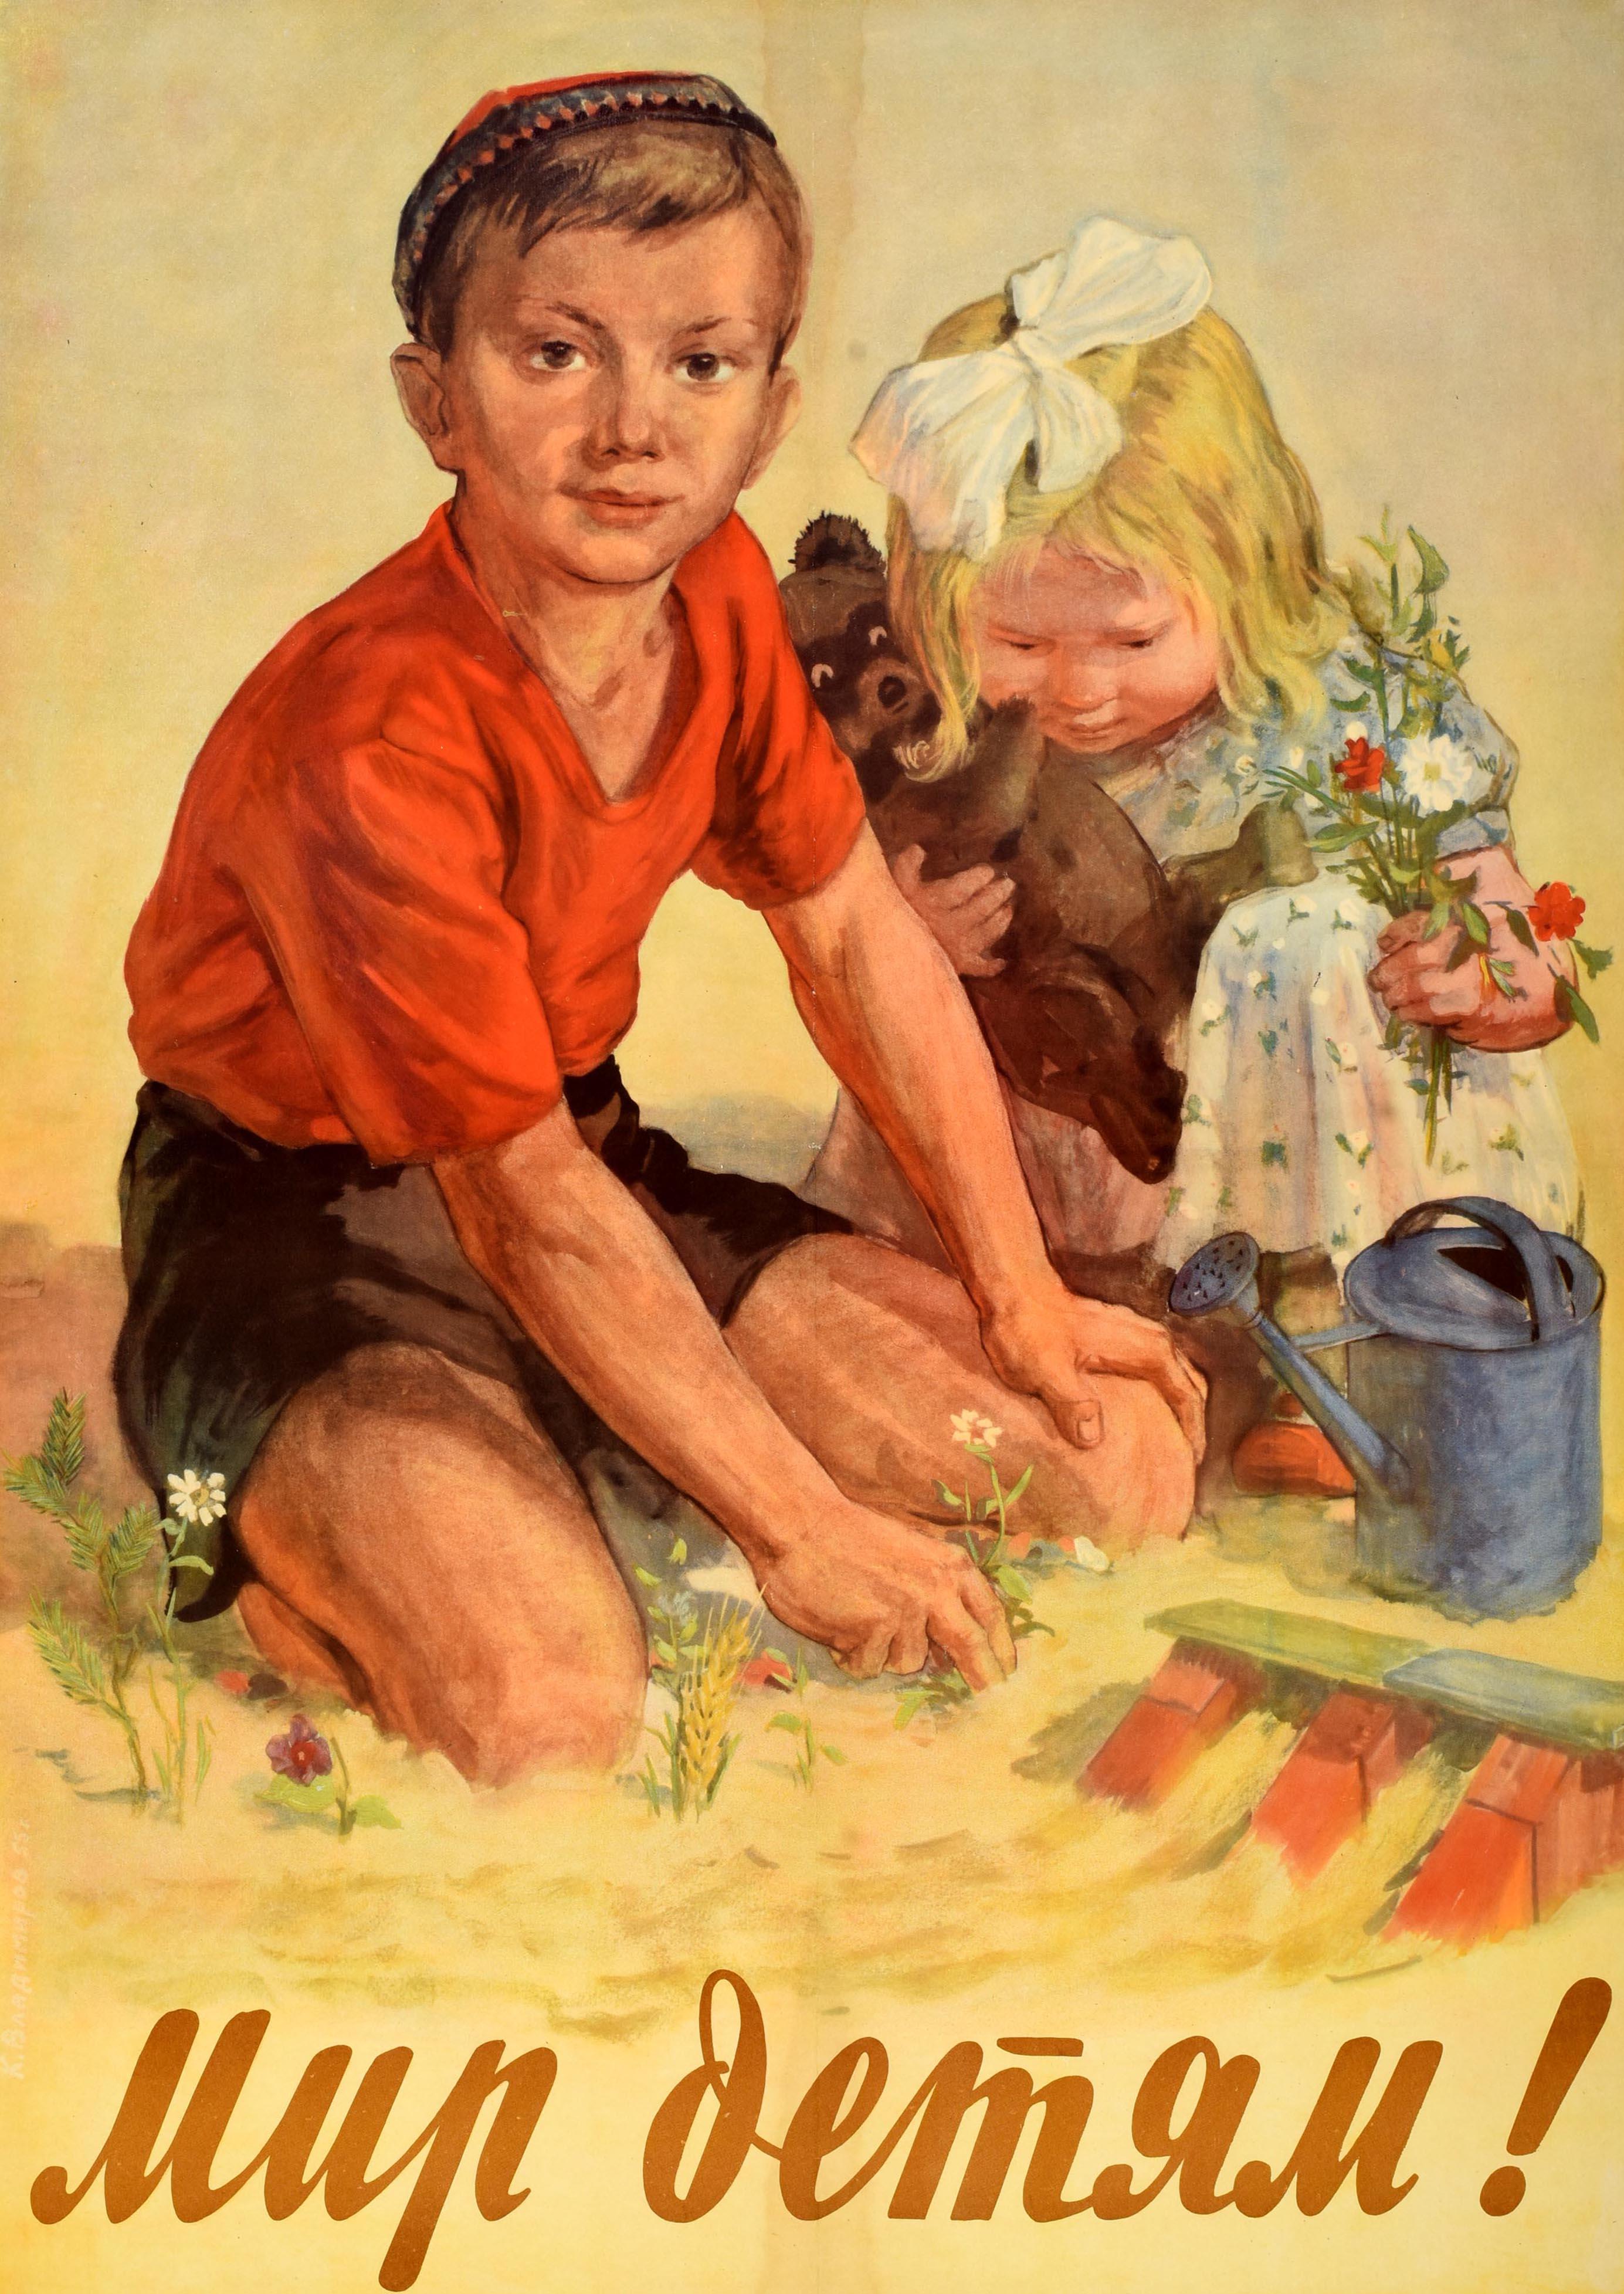 Original vintage Soviet propaganda poster - Peace to Children! / Мир детям! - featuring a painting of a young boy looking at the viewer while picking a daisy flower next to a watering can with a young girl beside him holding a teddy bear and a bunch